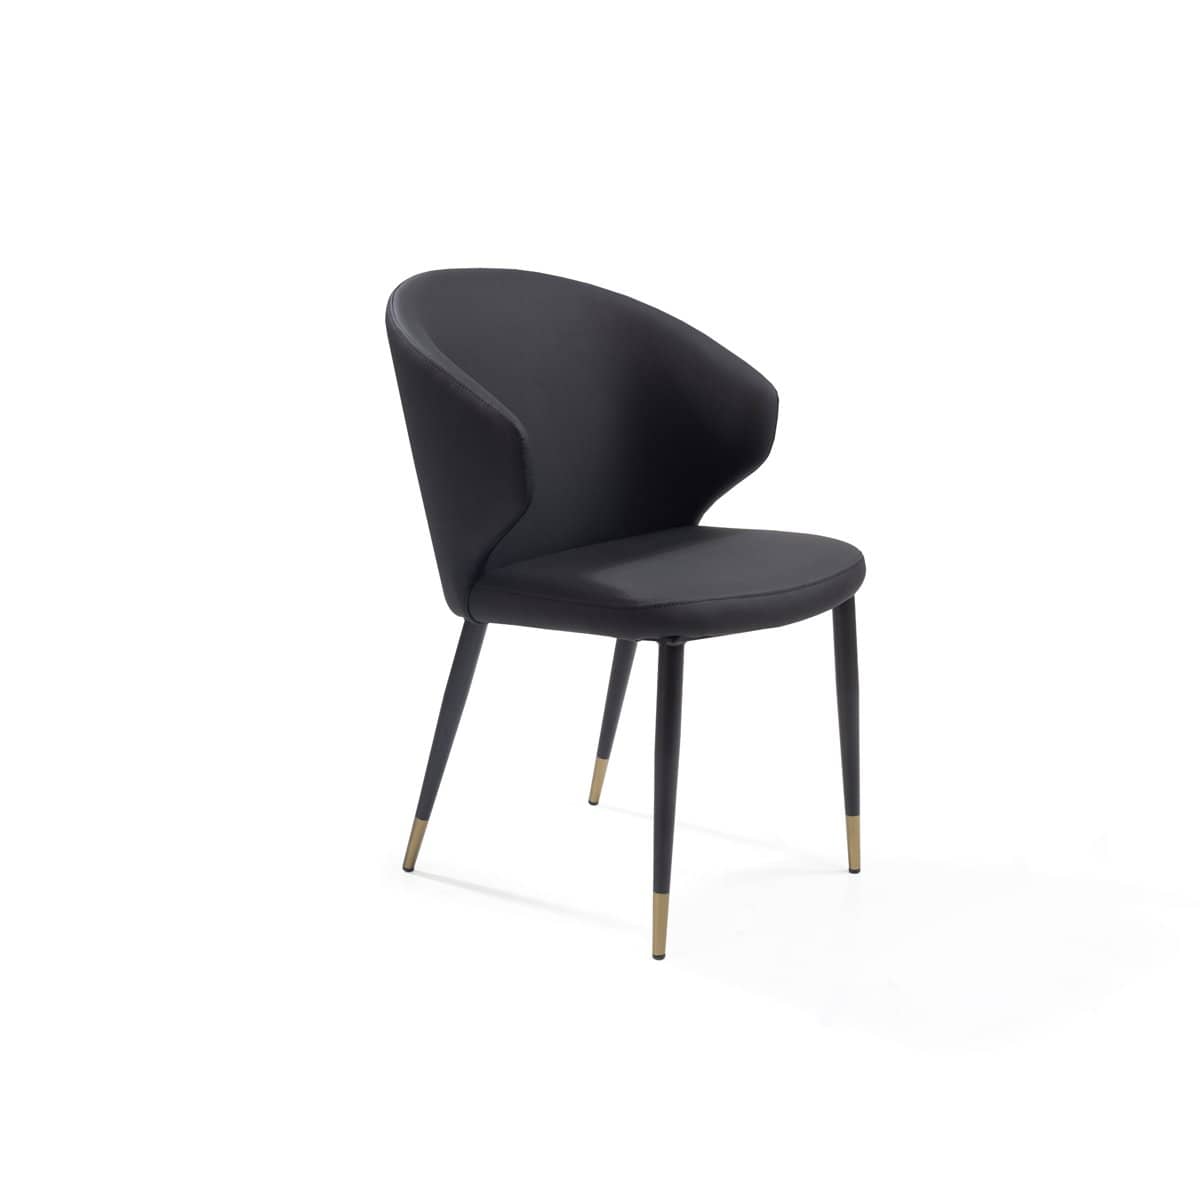 Express Dining Chair - Bellroy Black Leather